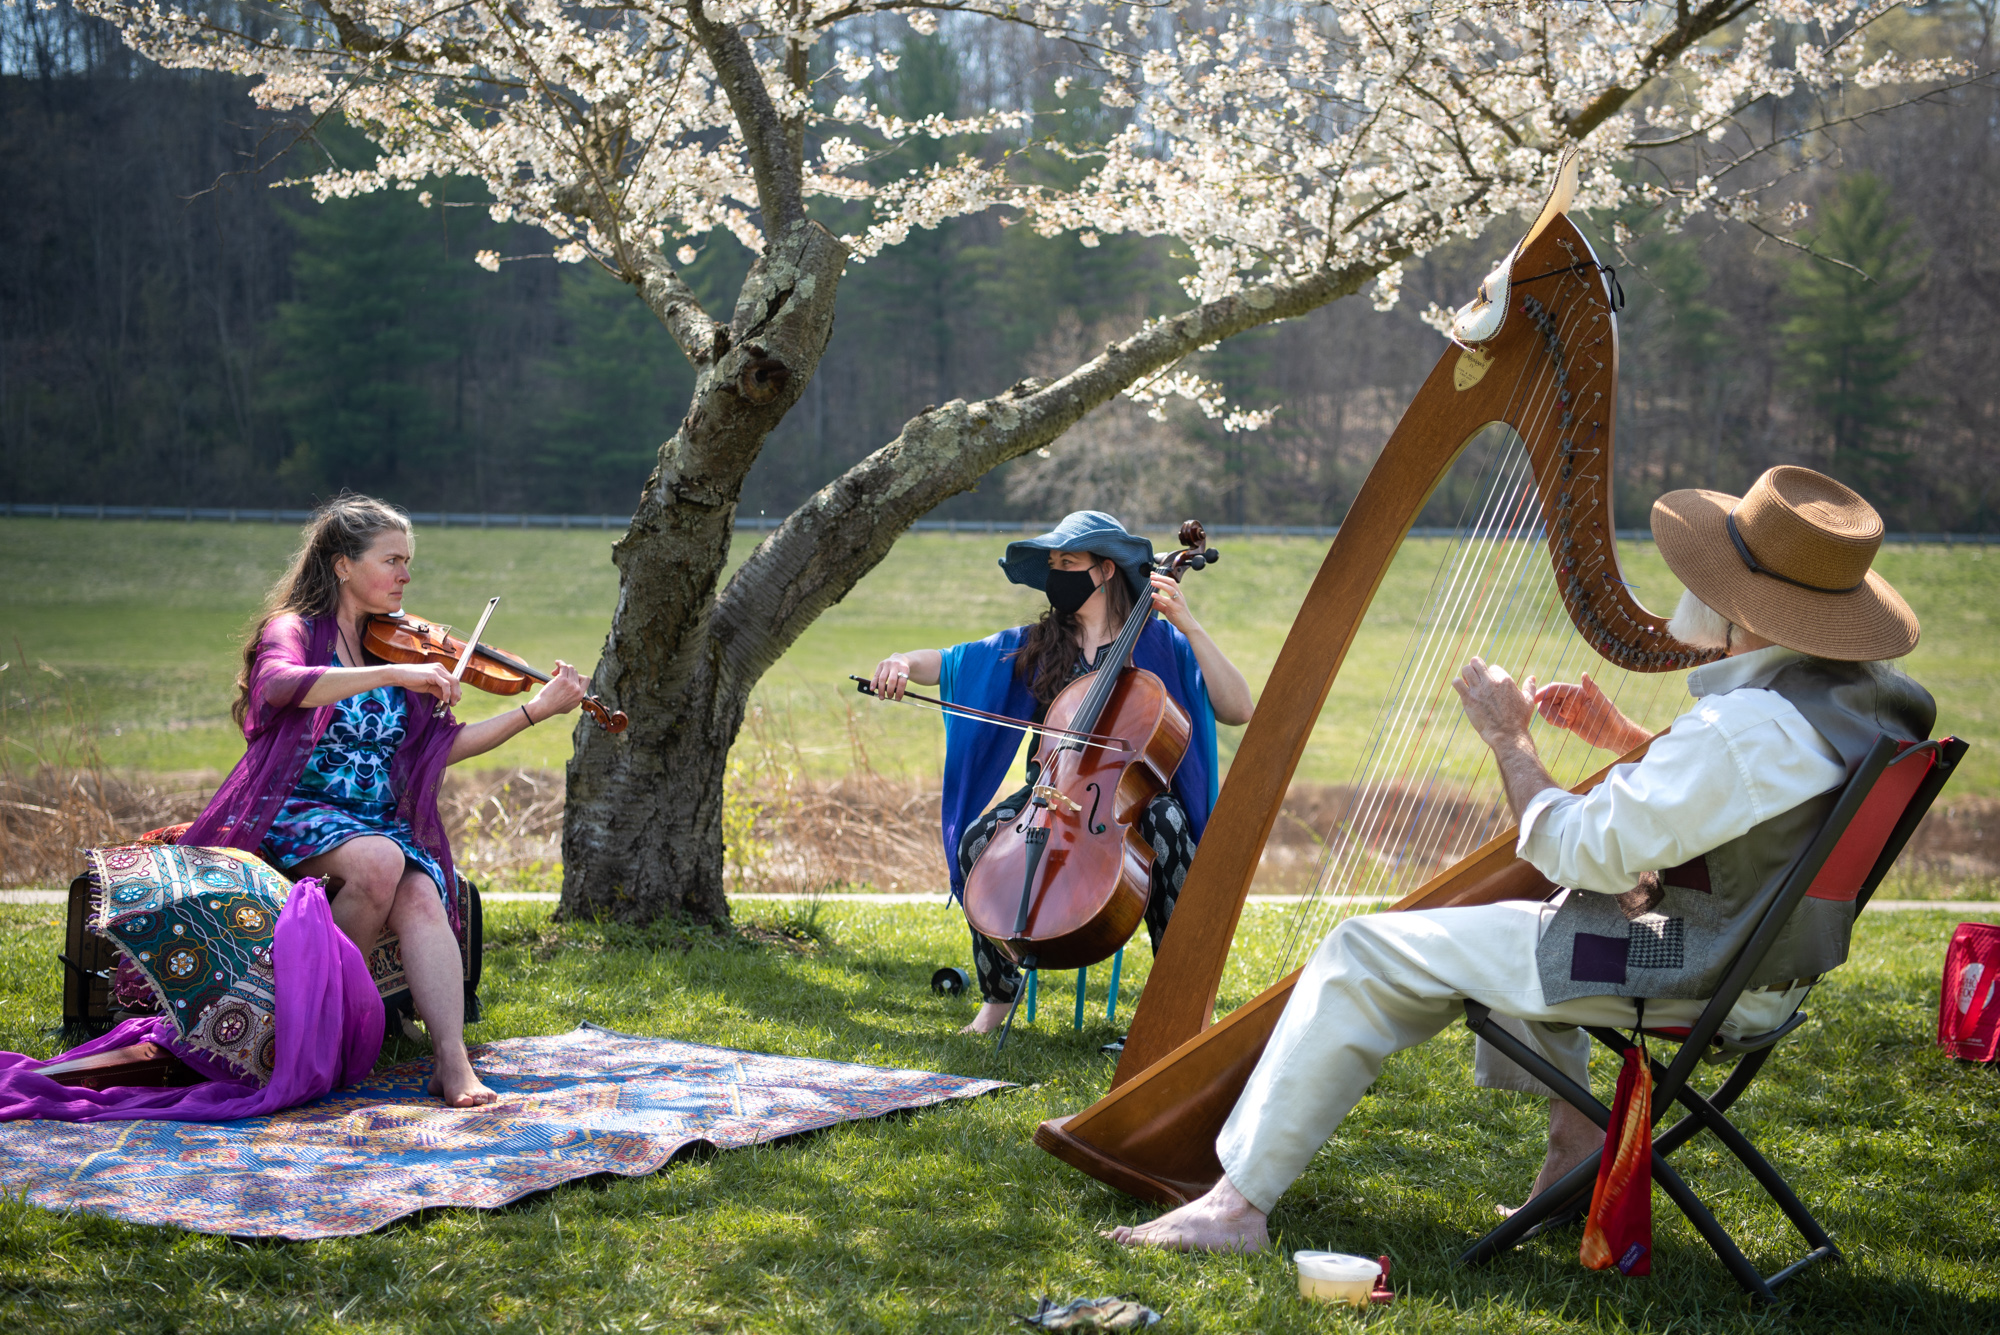 A string instrument trio performs on the lawn under a blooming Cherry Blossom tree